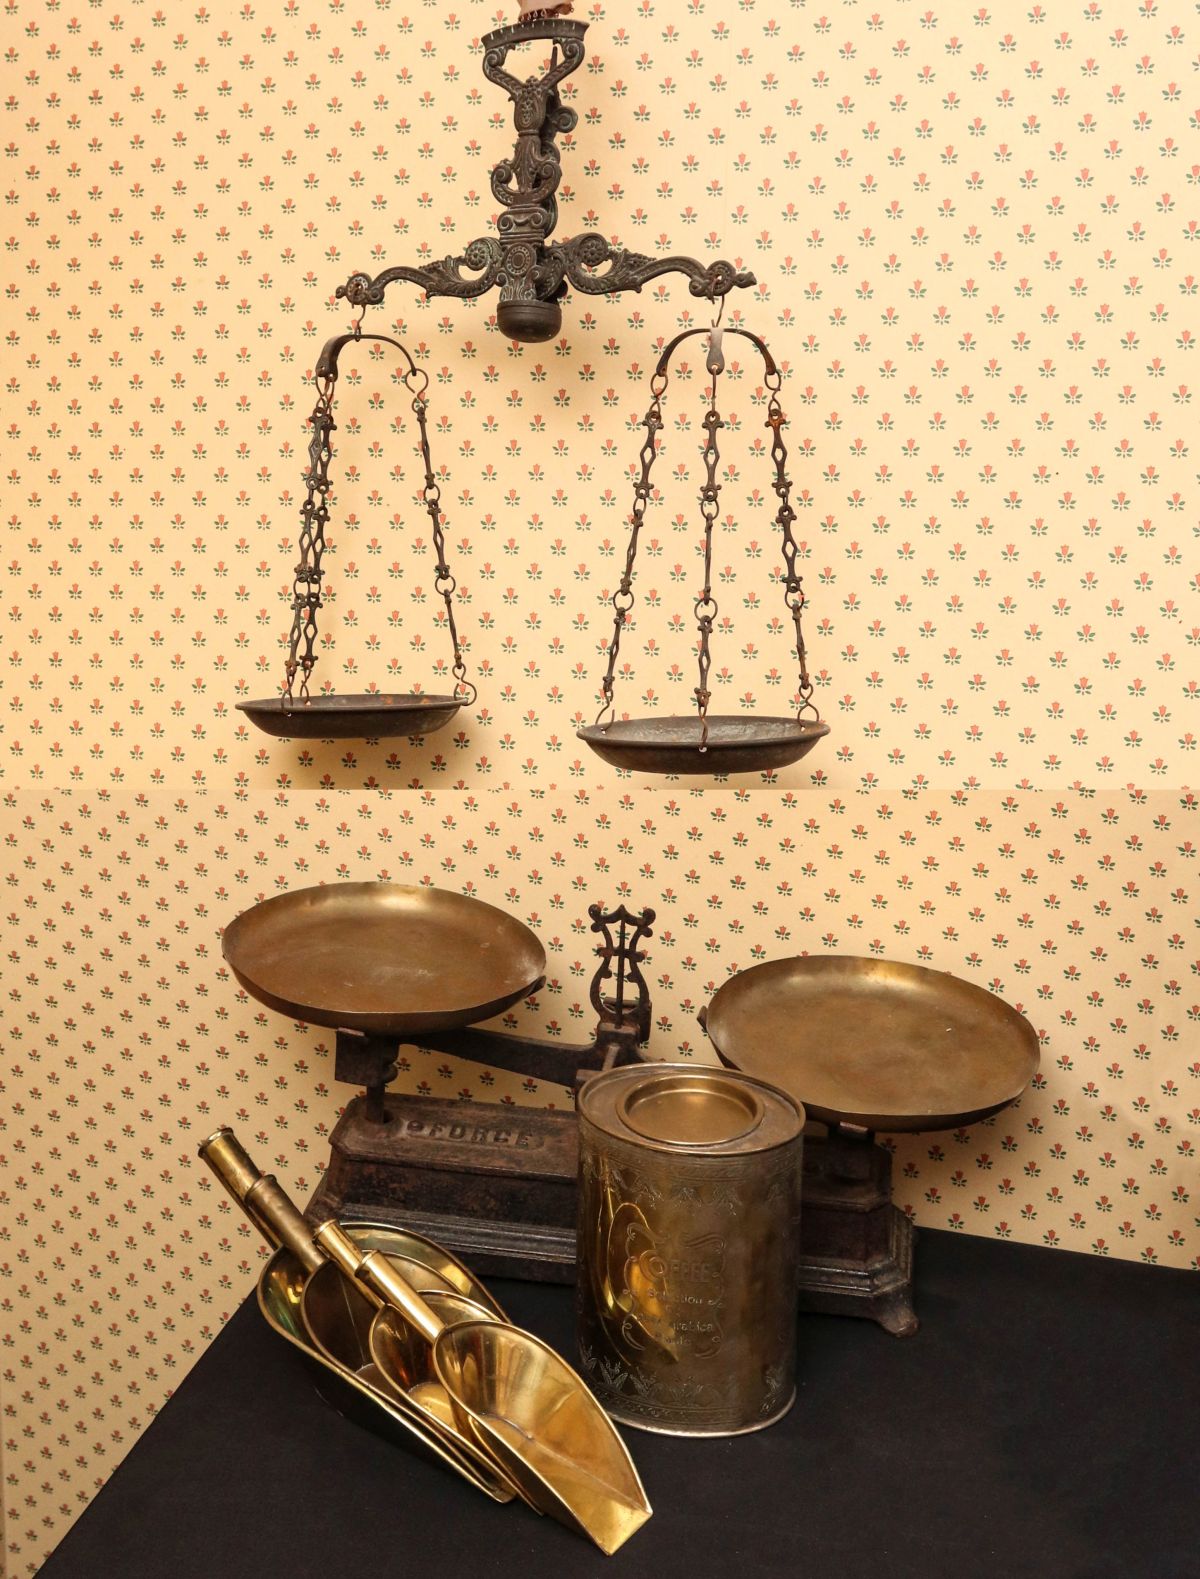 TWO ANTIQUE SCALES, FOUR BRASS SCOOPS, MORE